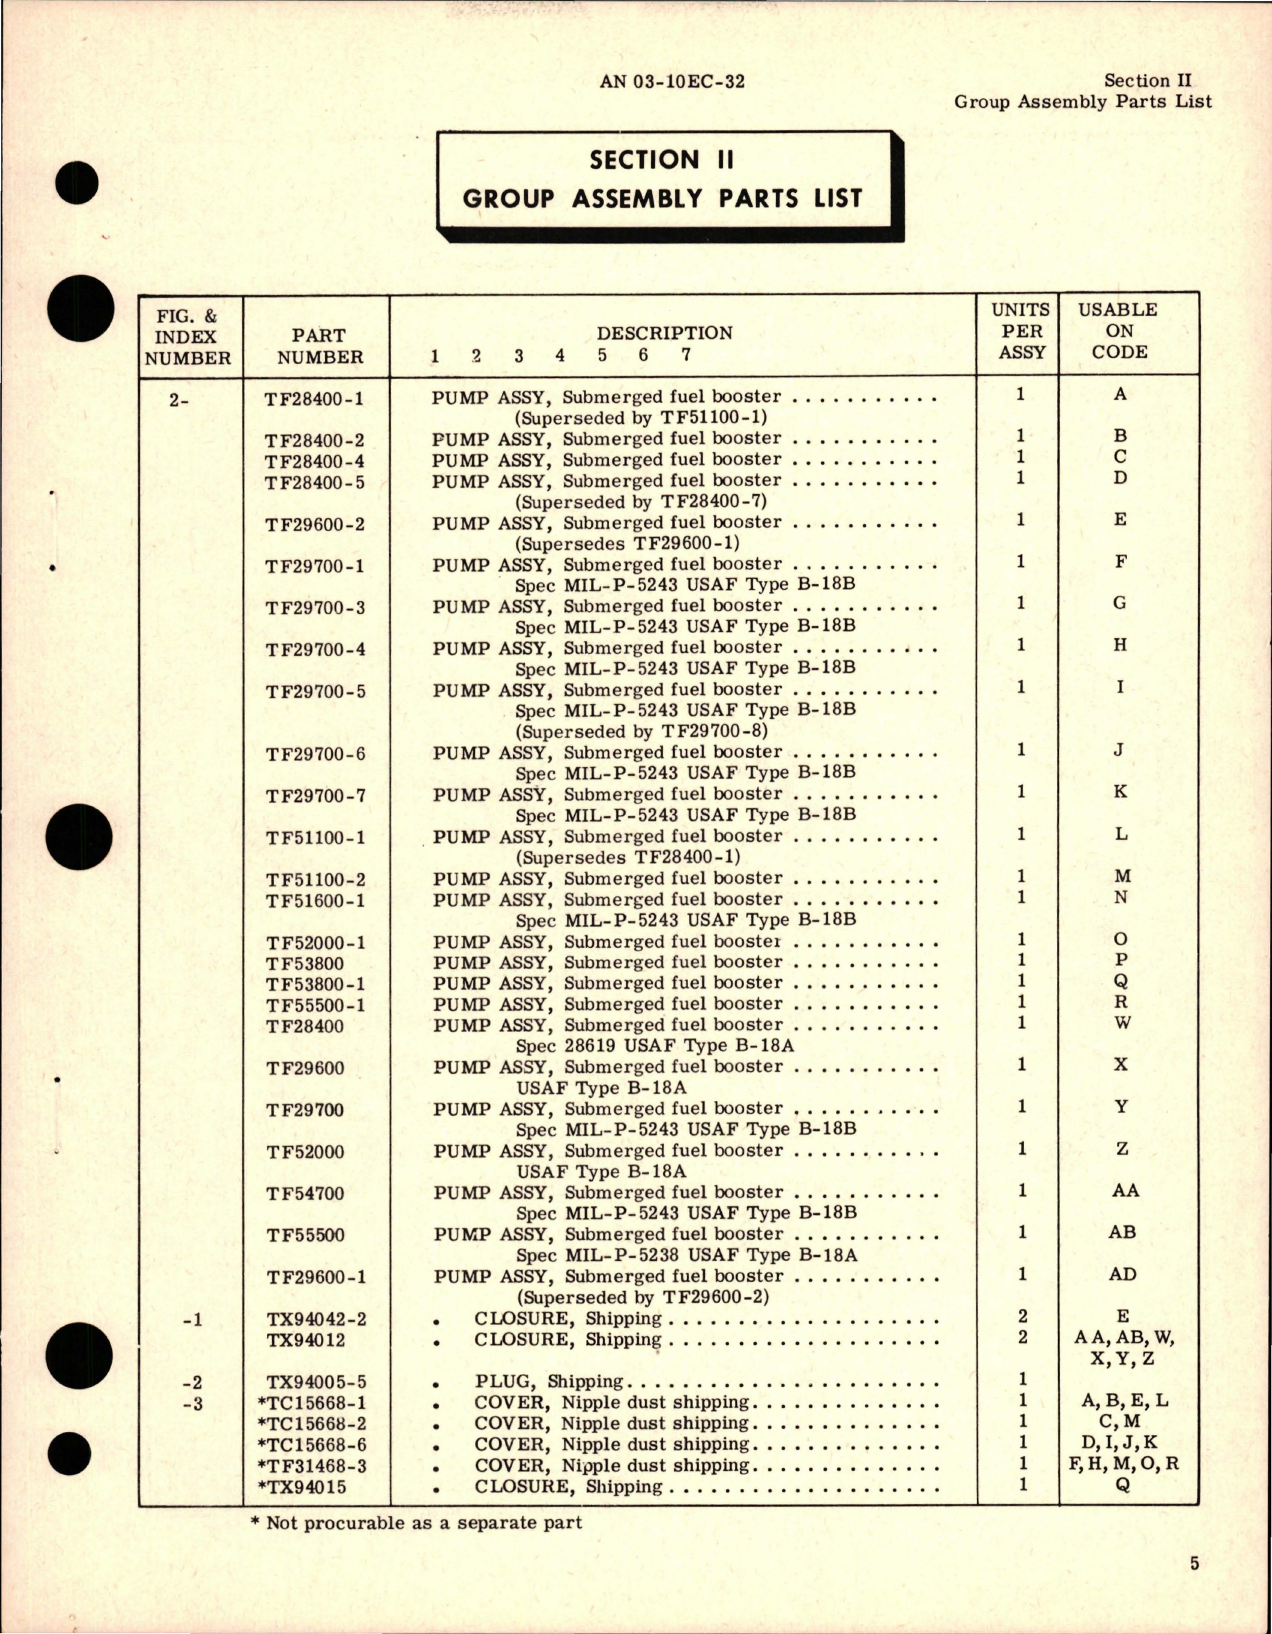 Sample page 7 from AirCorps Library document: Illustrated Parts Breakdown for Submerged Fuel Booster Pump